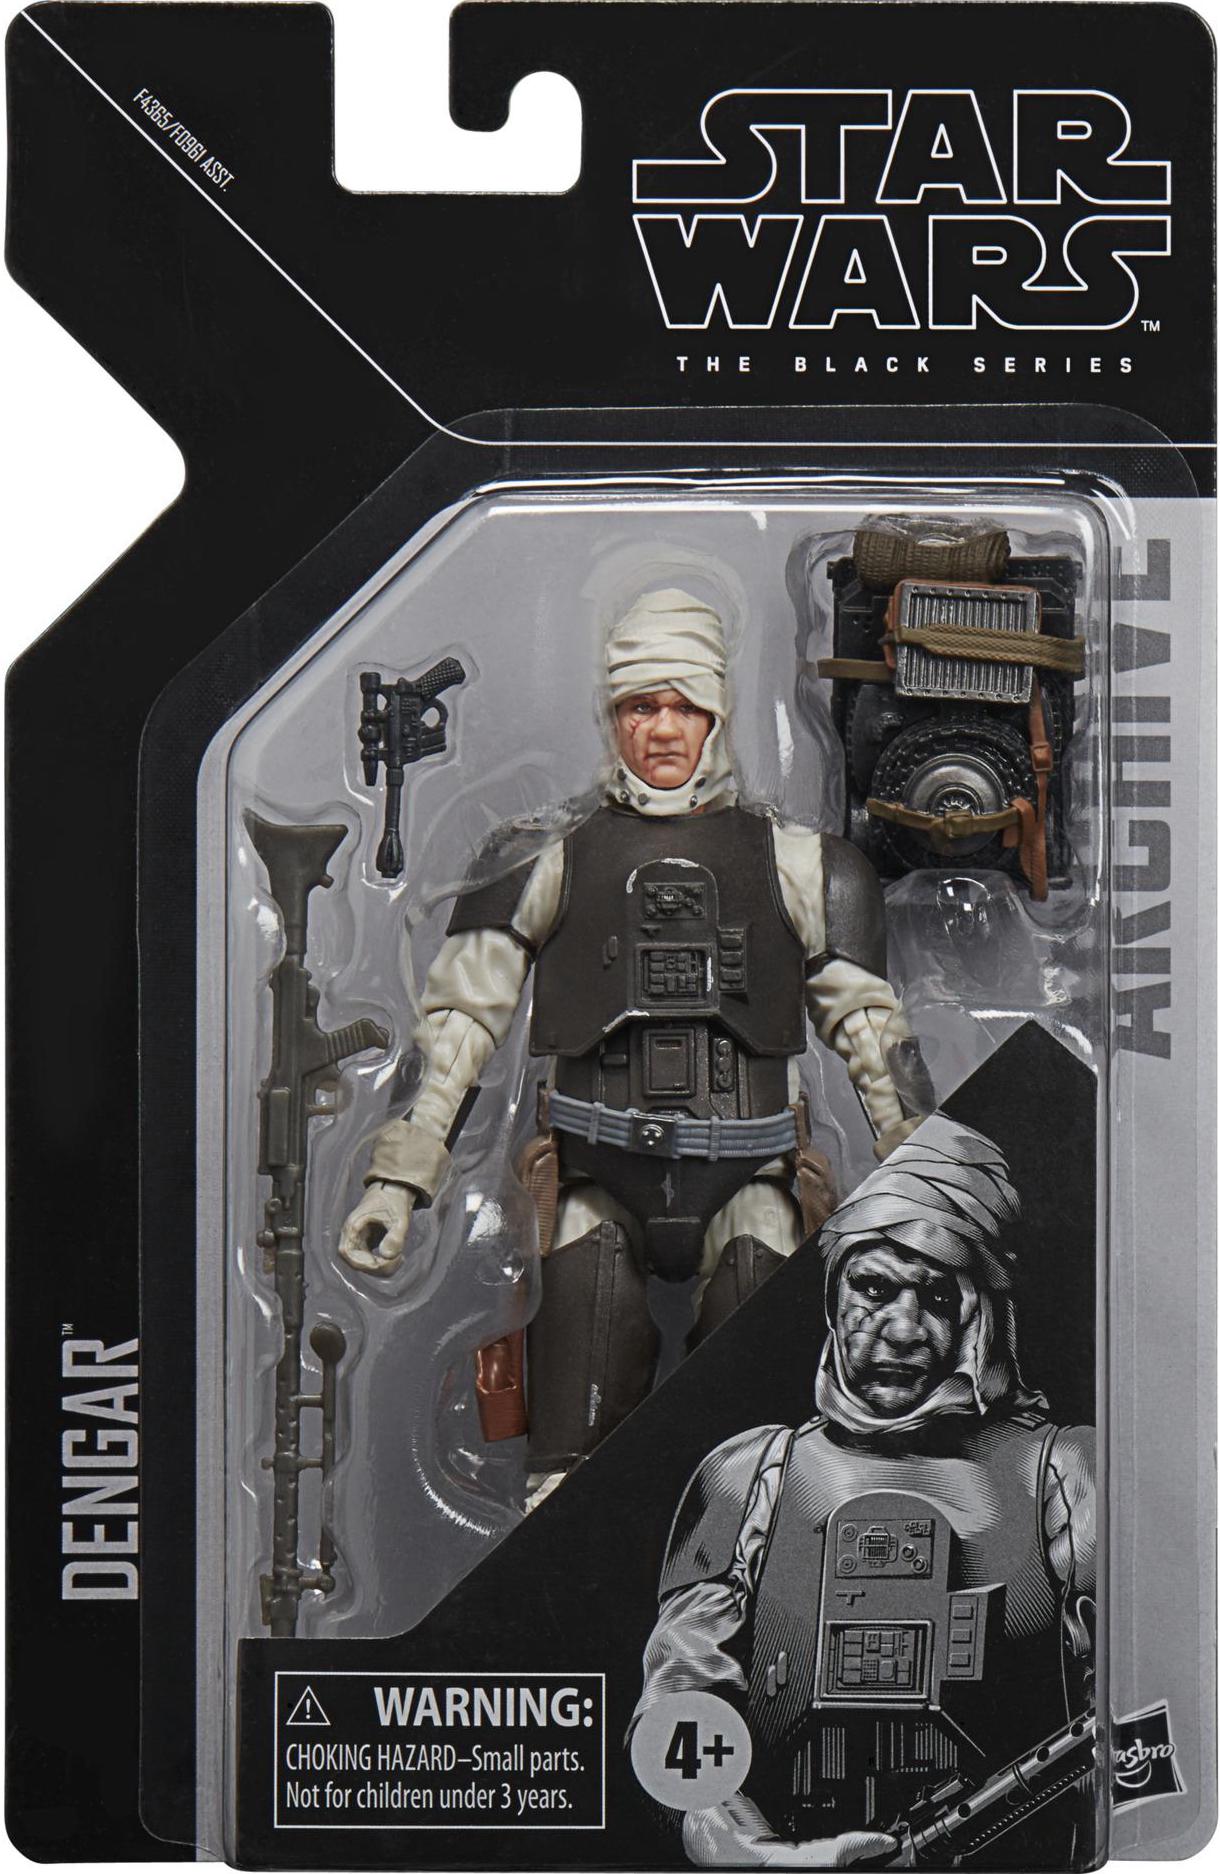 STAR WARS Black Series ARCHIVE 2021 WAVE 1 SET COLLECTORS GRADE MINT IN STOCK 